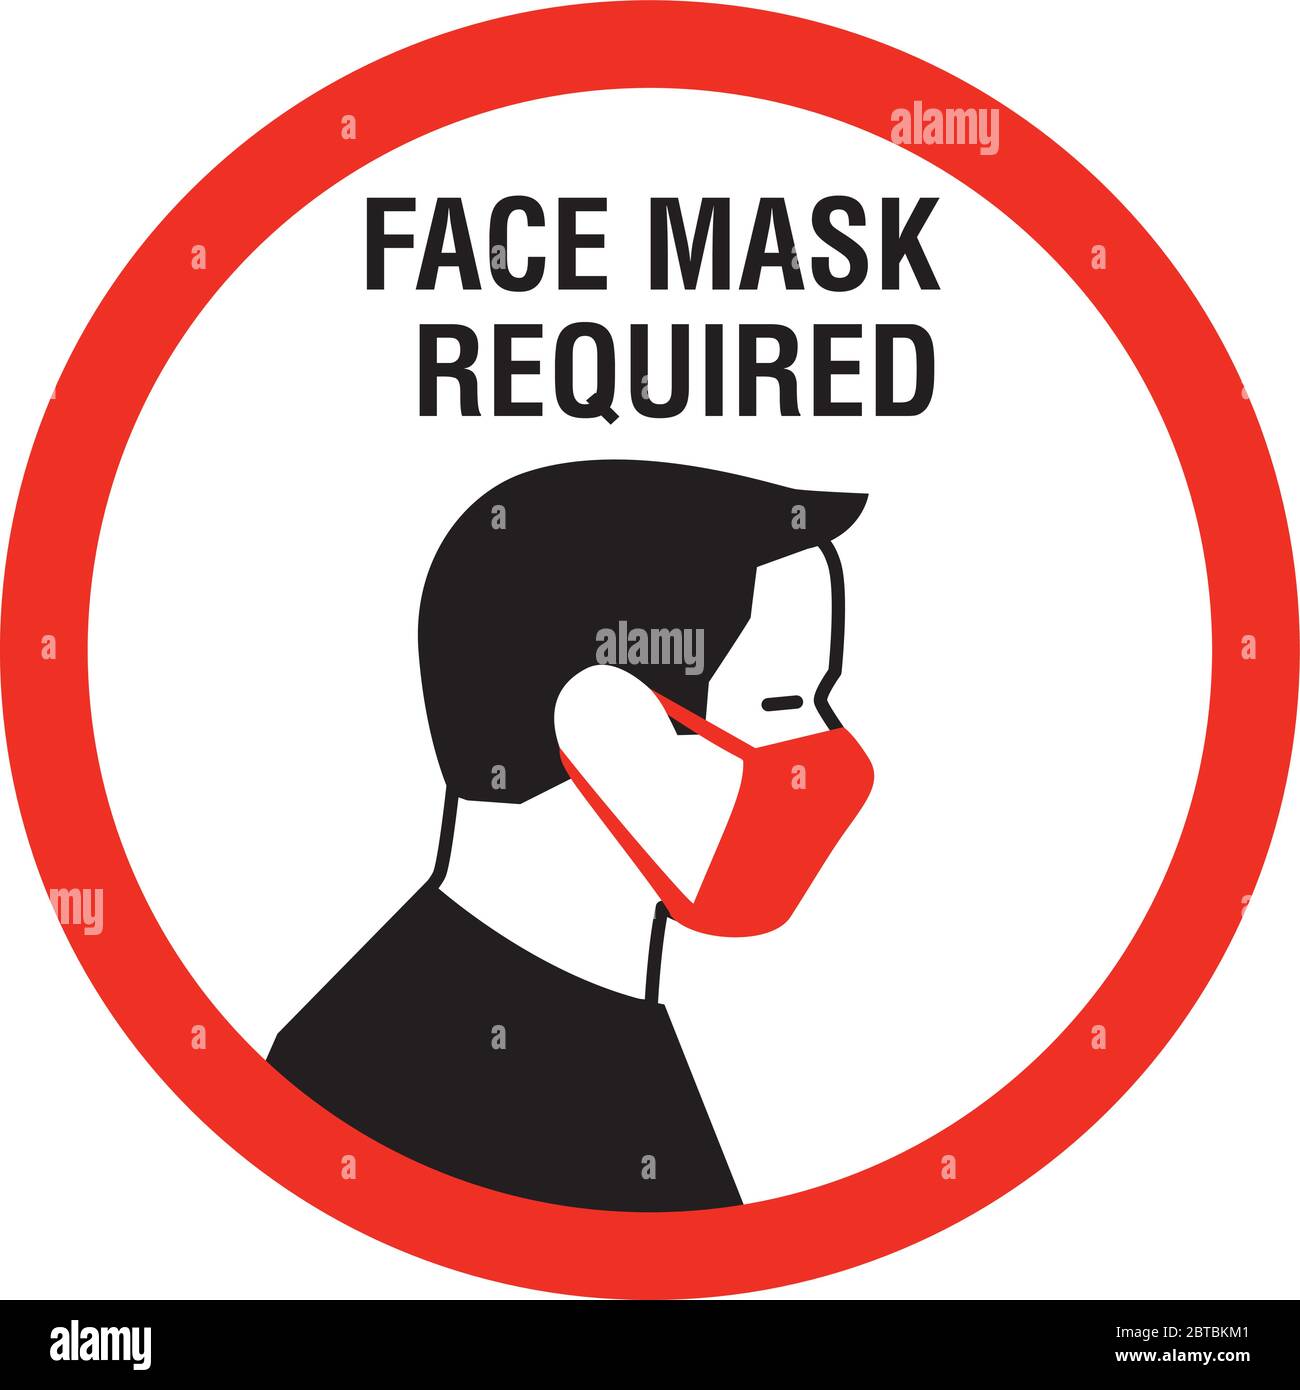 Face mask required sign. Protective measures against coronavirus COVID-19 Stock Vector